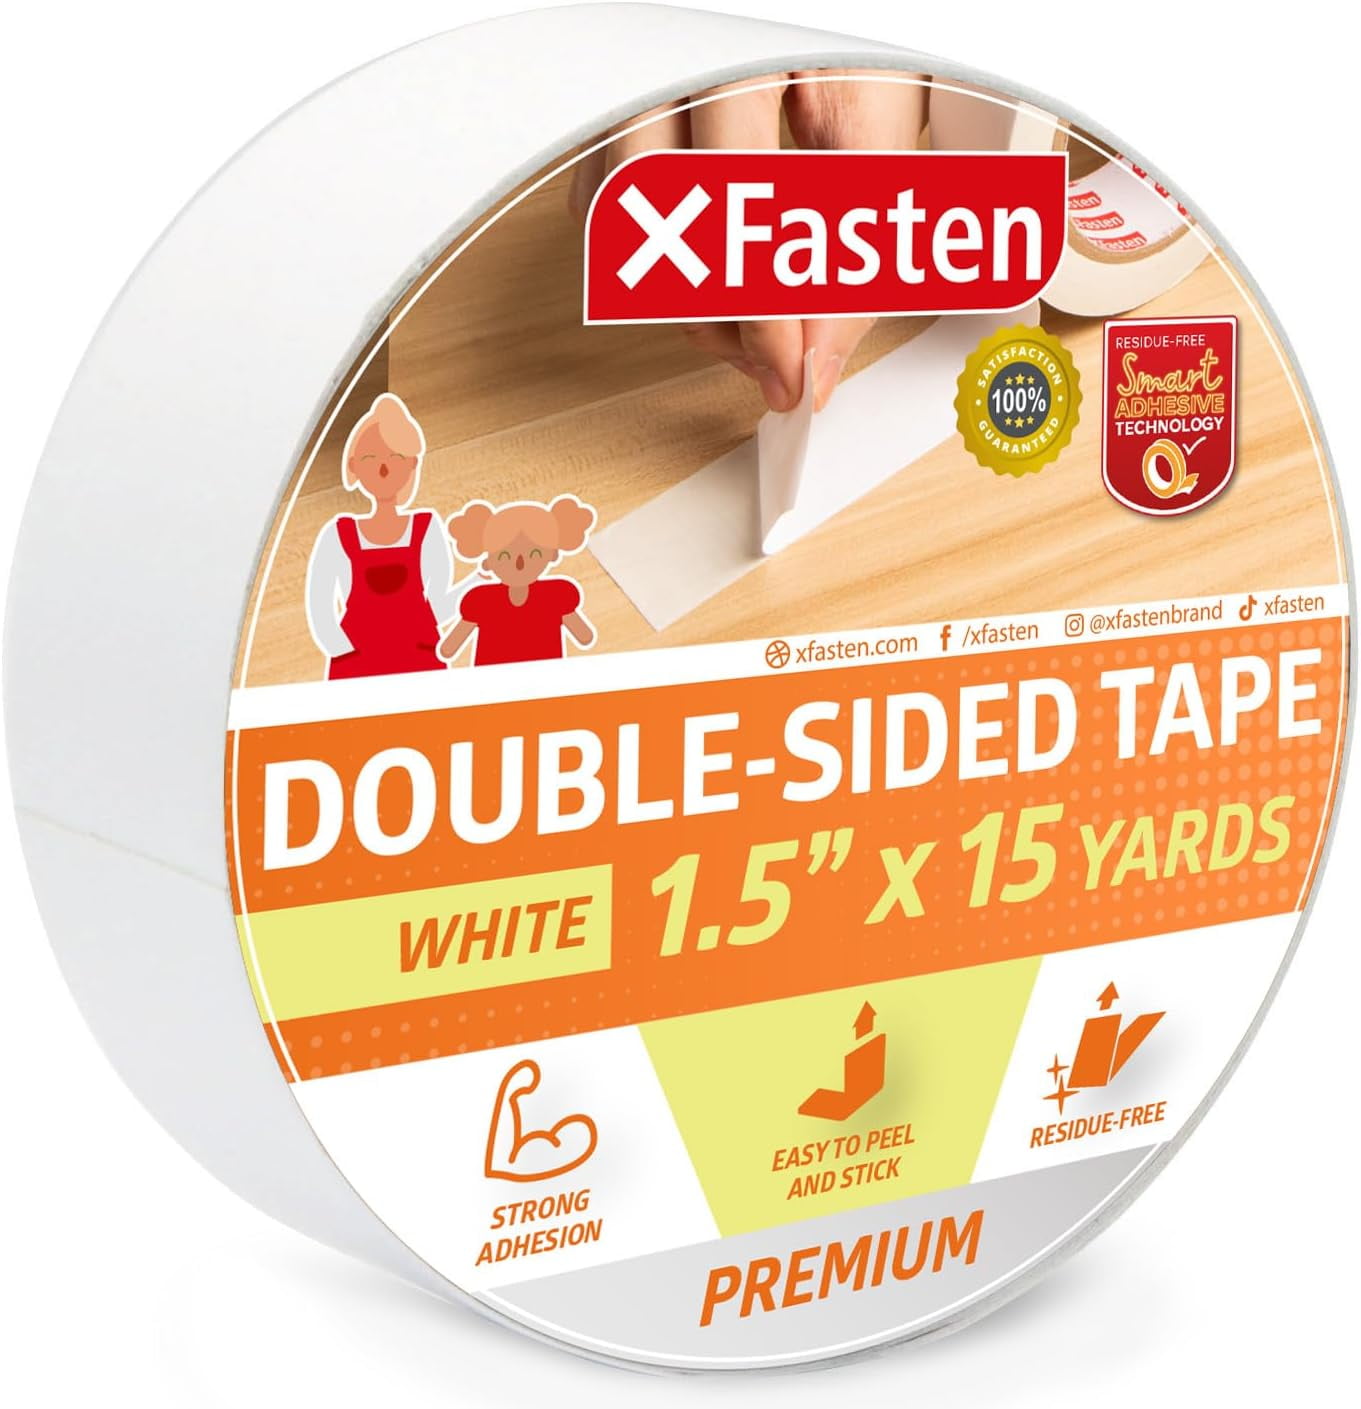 3M Scotch Double Sided Tape - GladGirl